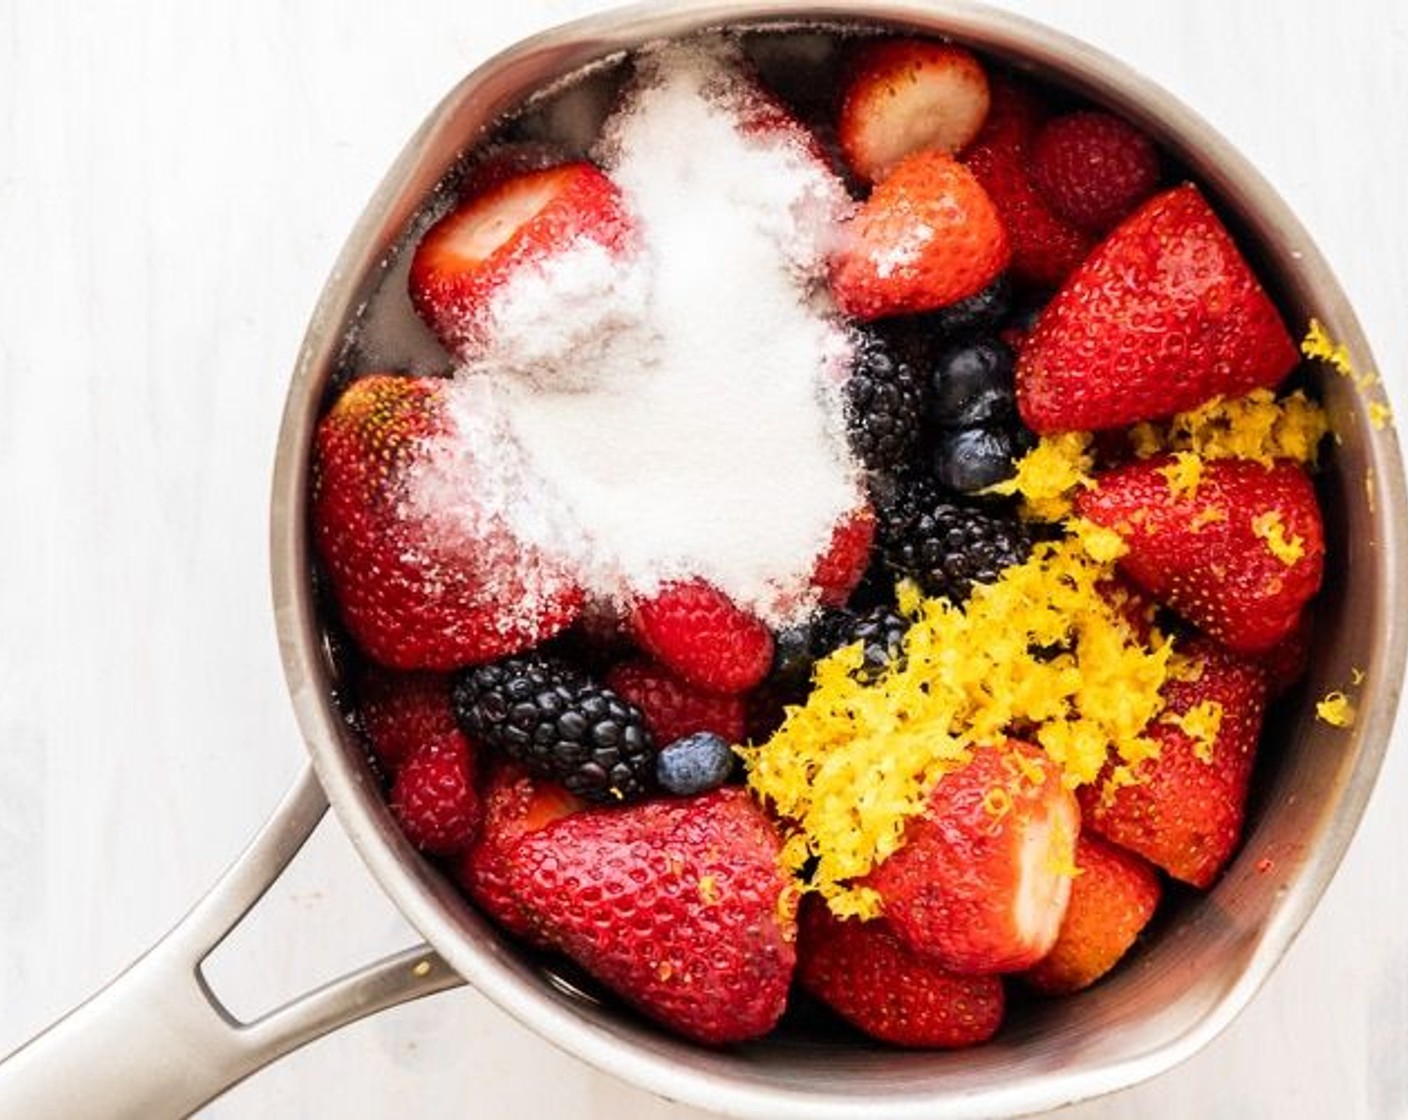 step 1 In a medium saucepot, mix together Fresh Strawberries (1 1/2 cups), Fresh Blueberries (2 cups), and Fresh Blackberries (2 cups). Add Granulated Sugar (1/2 cup), Lemon (1), and a squeeze of fresh lemon juice. Stir together to evenly coat the berries in sugar.